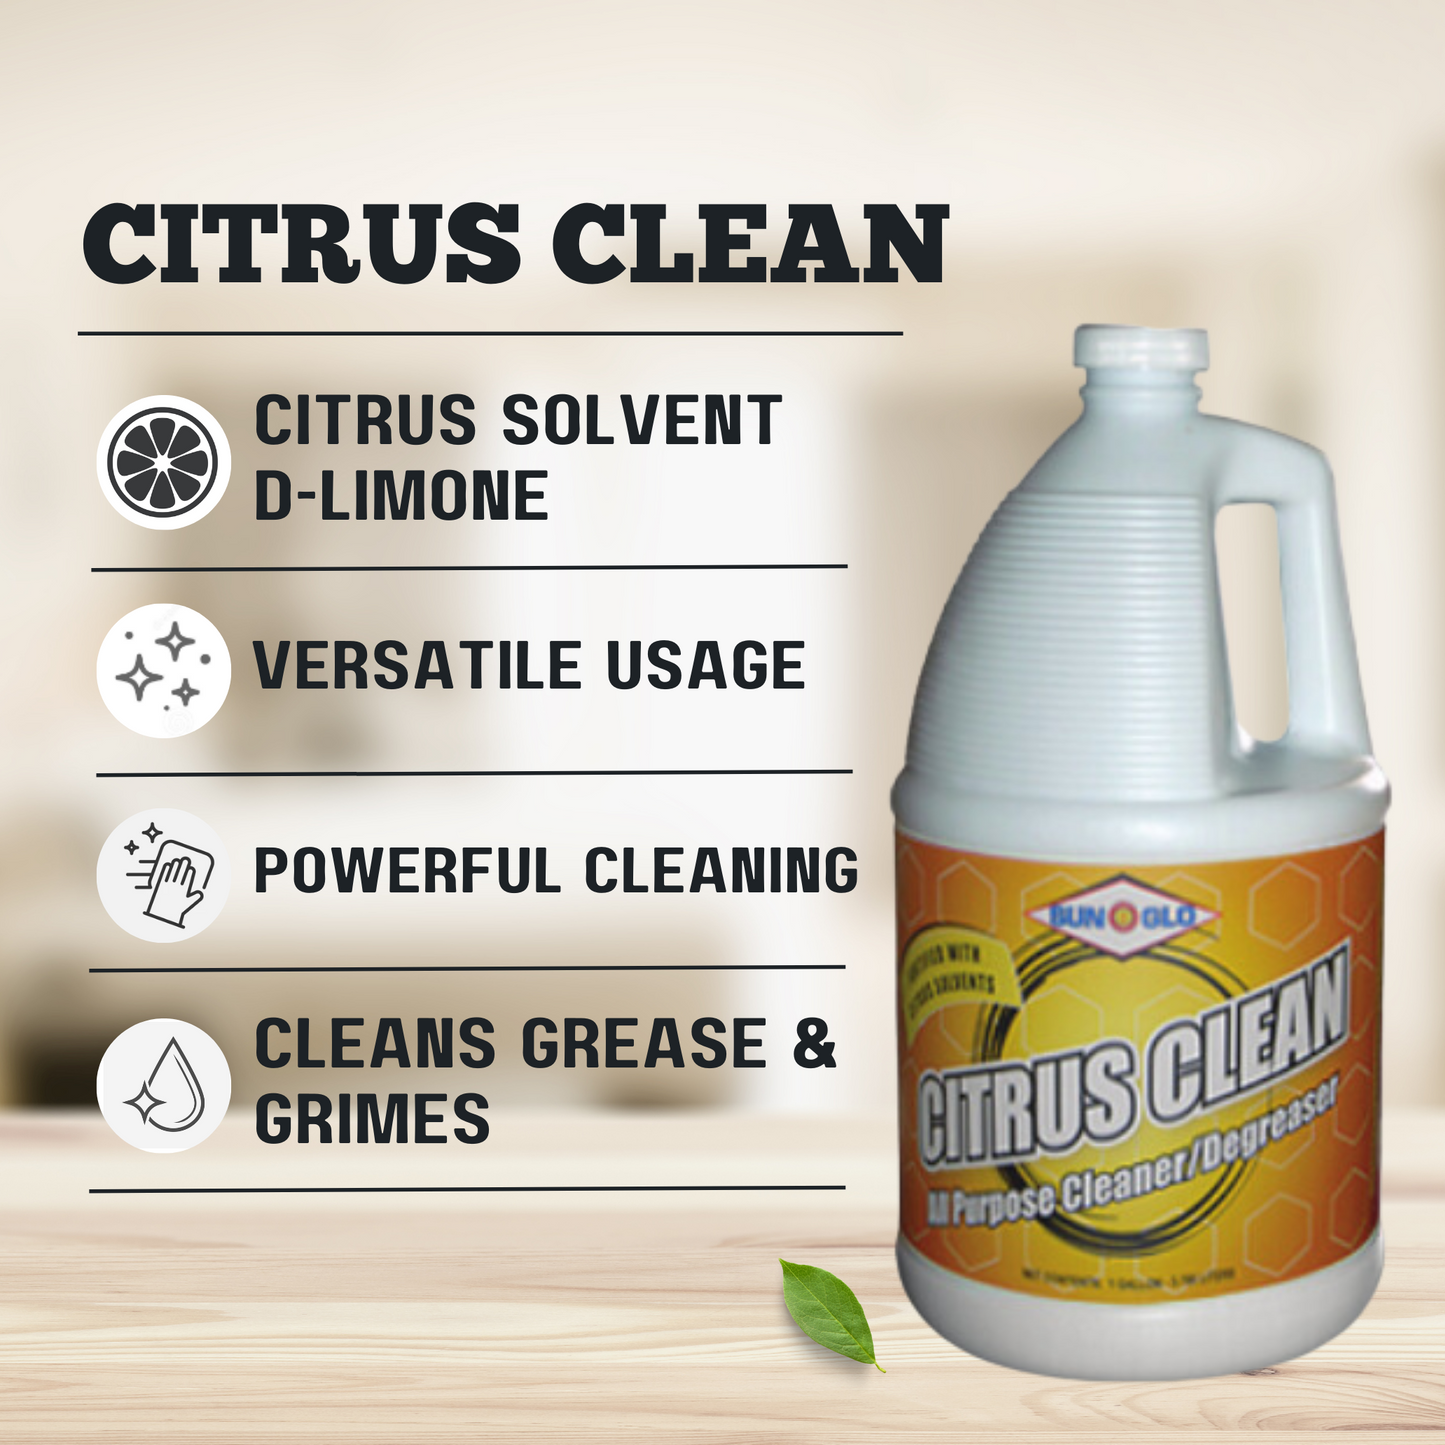 SUN-GLO Citrus Clean - Heavy Duty Degreaser and All-Purpose Cleaner (4x1 Gallon Case)